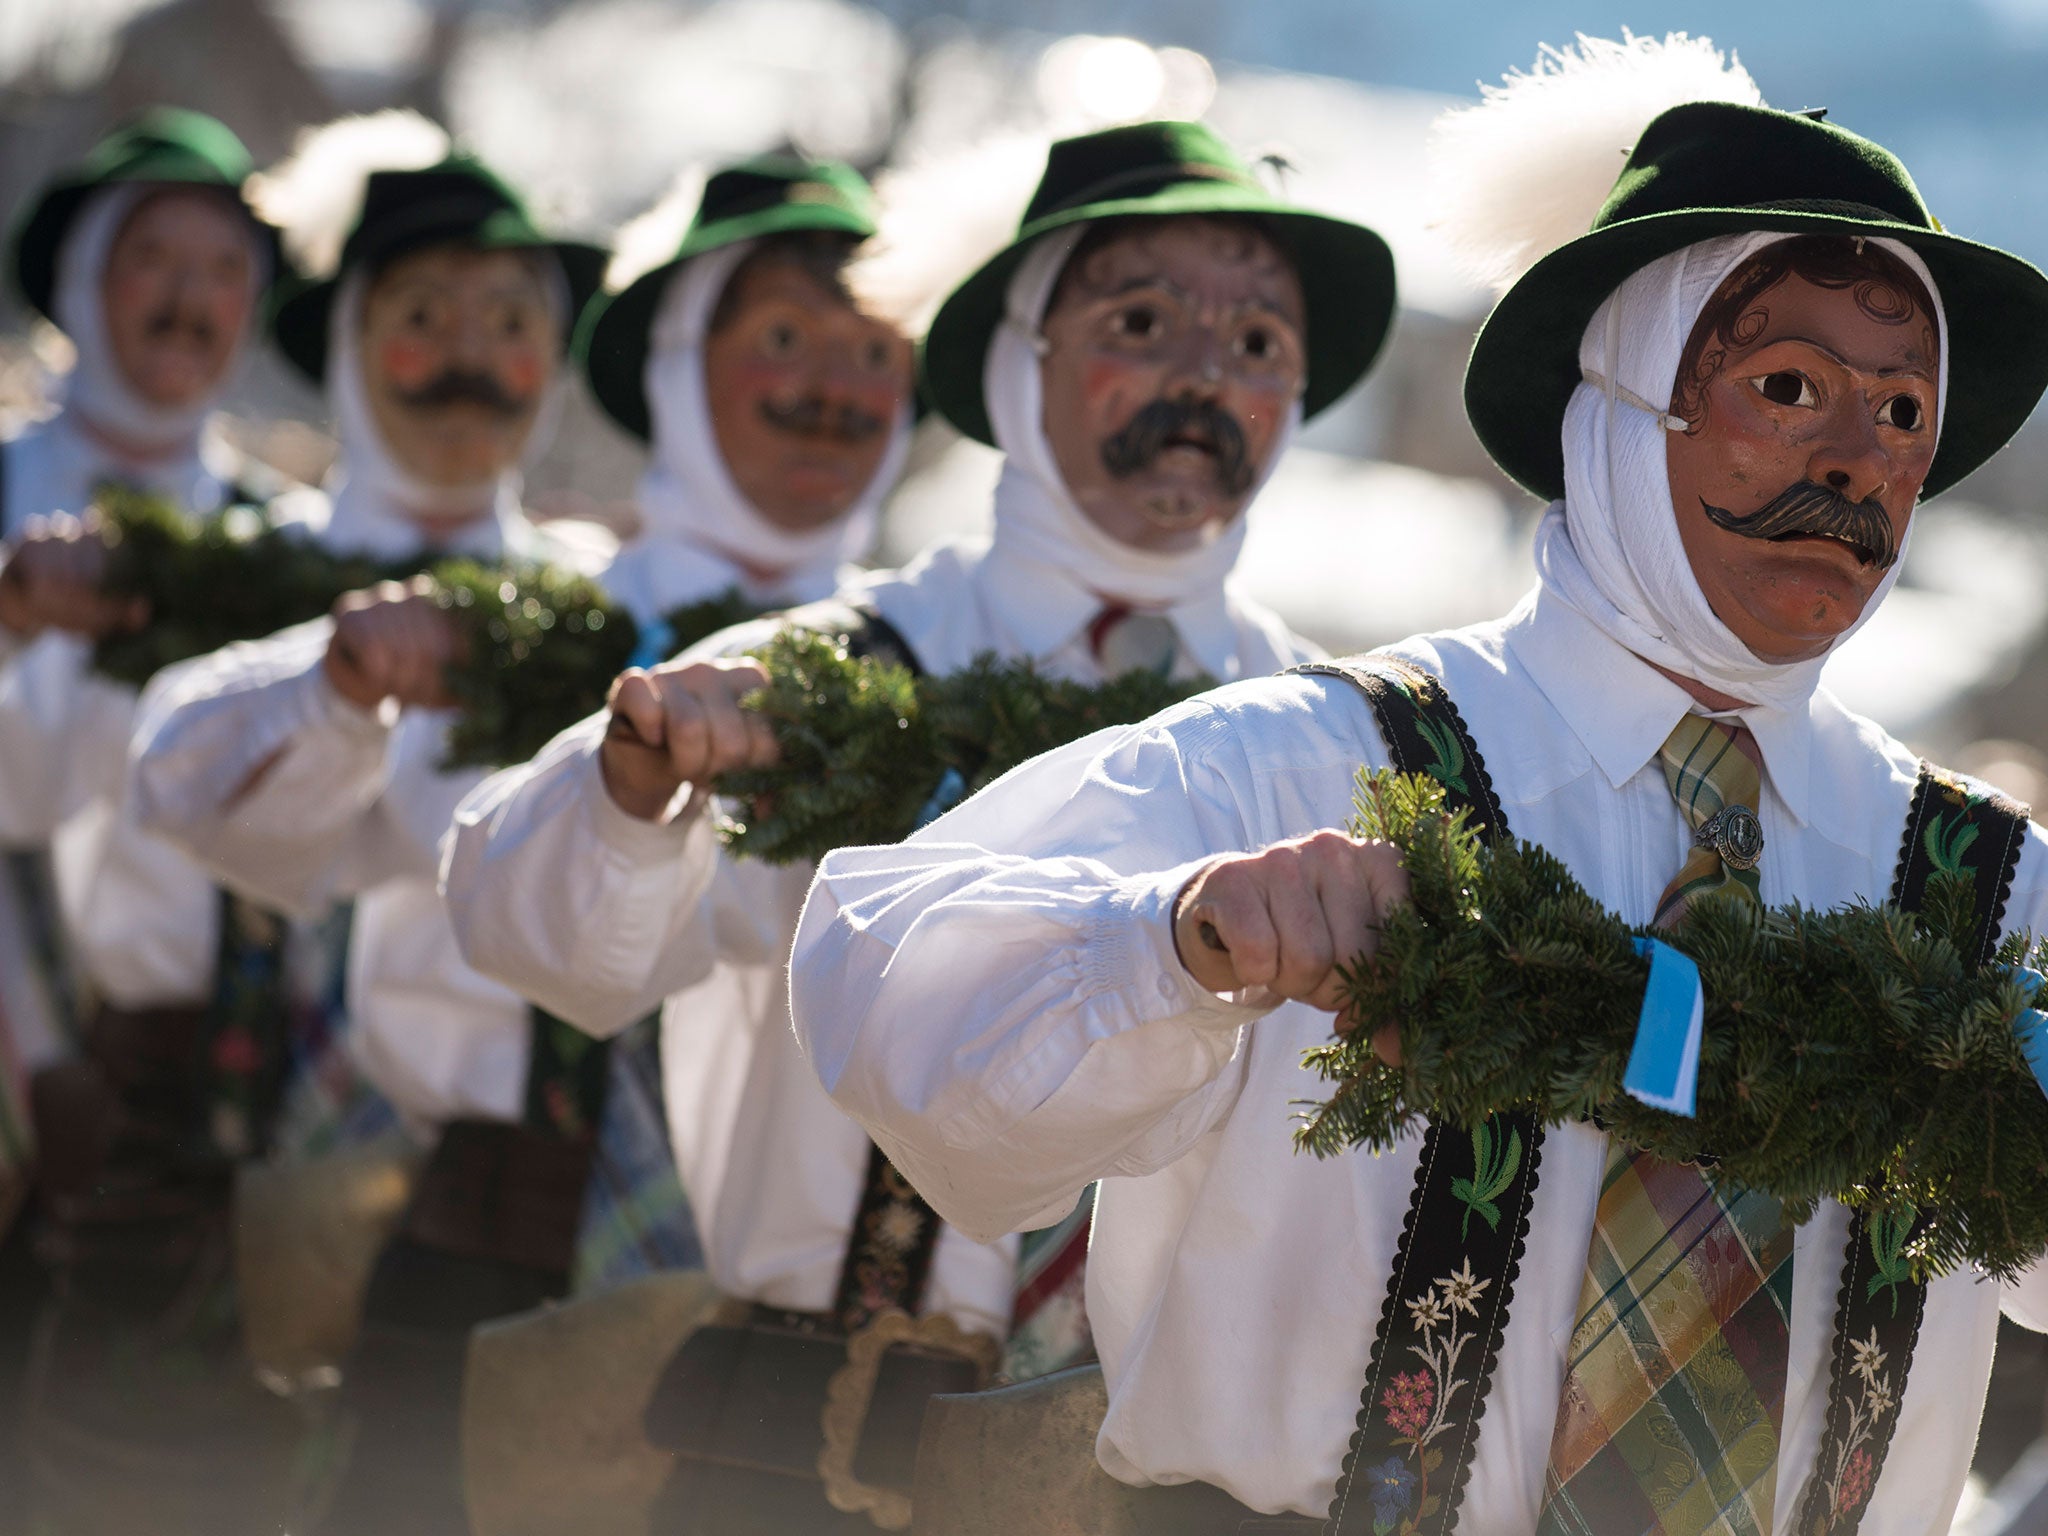 Costumed participants wearing traditional wooden masks perform in the annual carnival parade on February 12, 2015 in Mittenwald